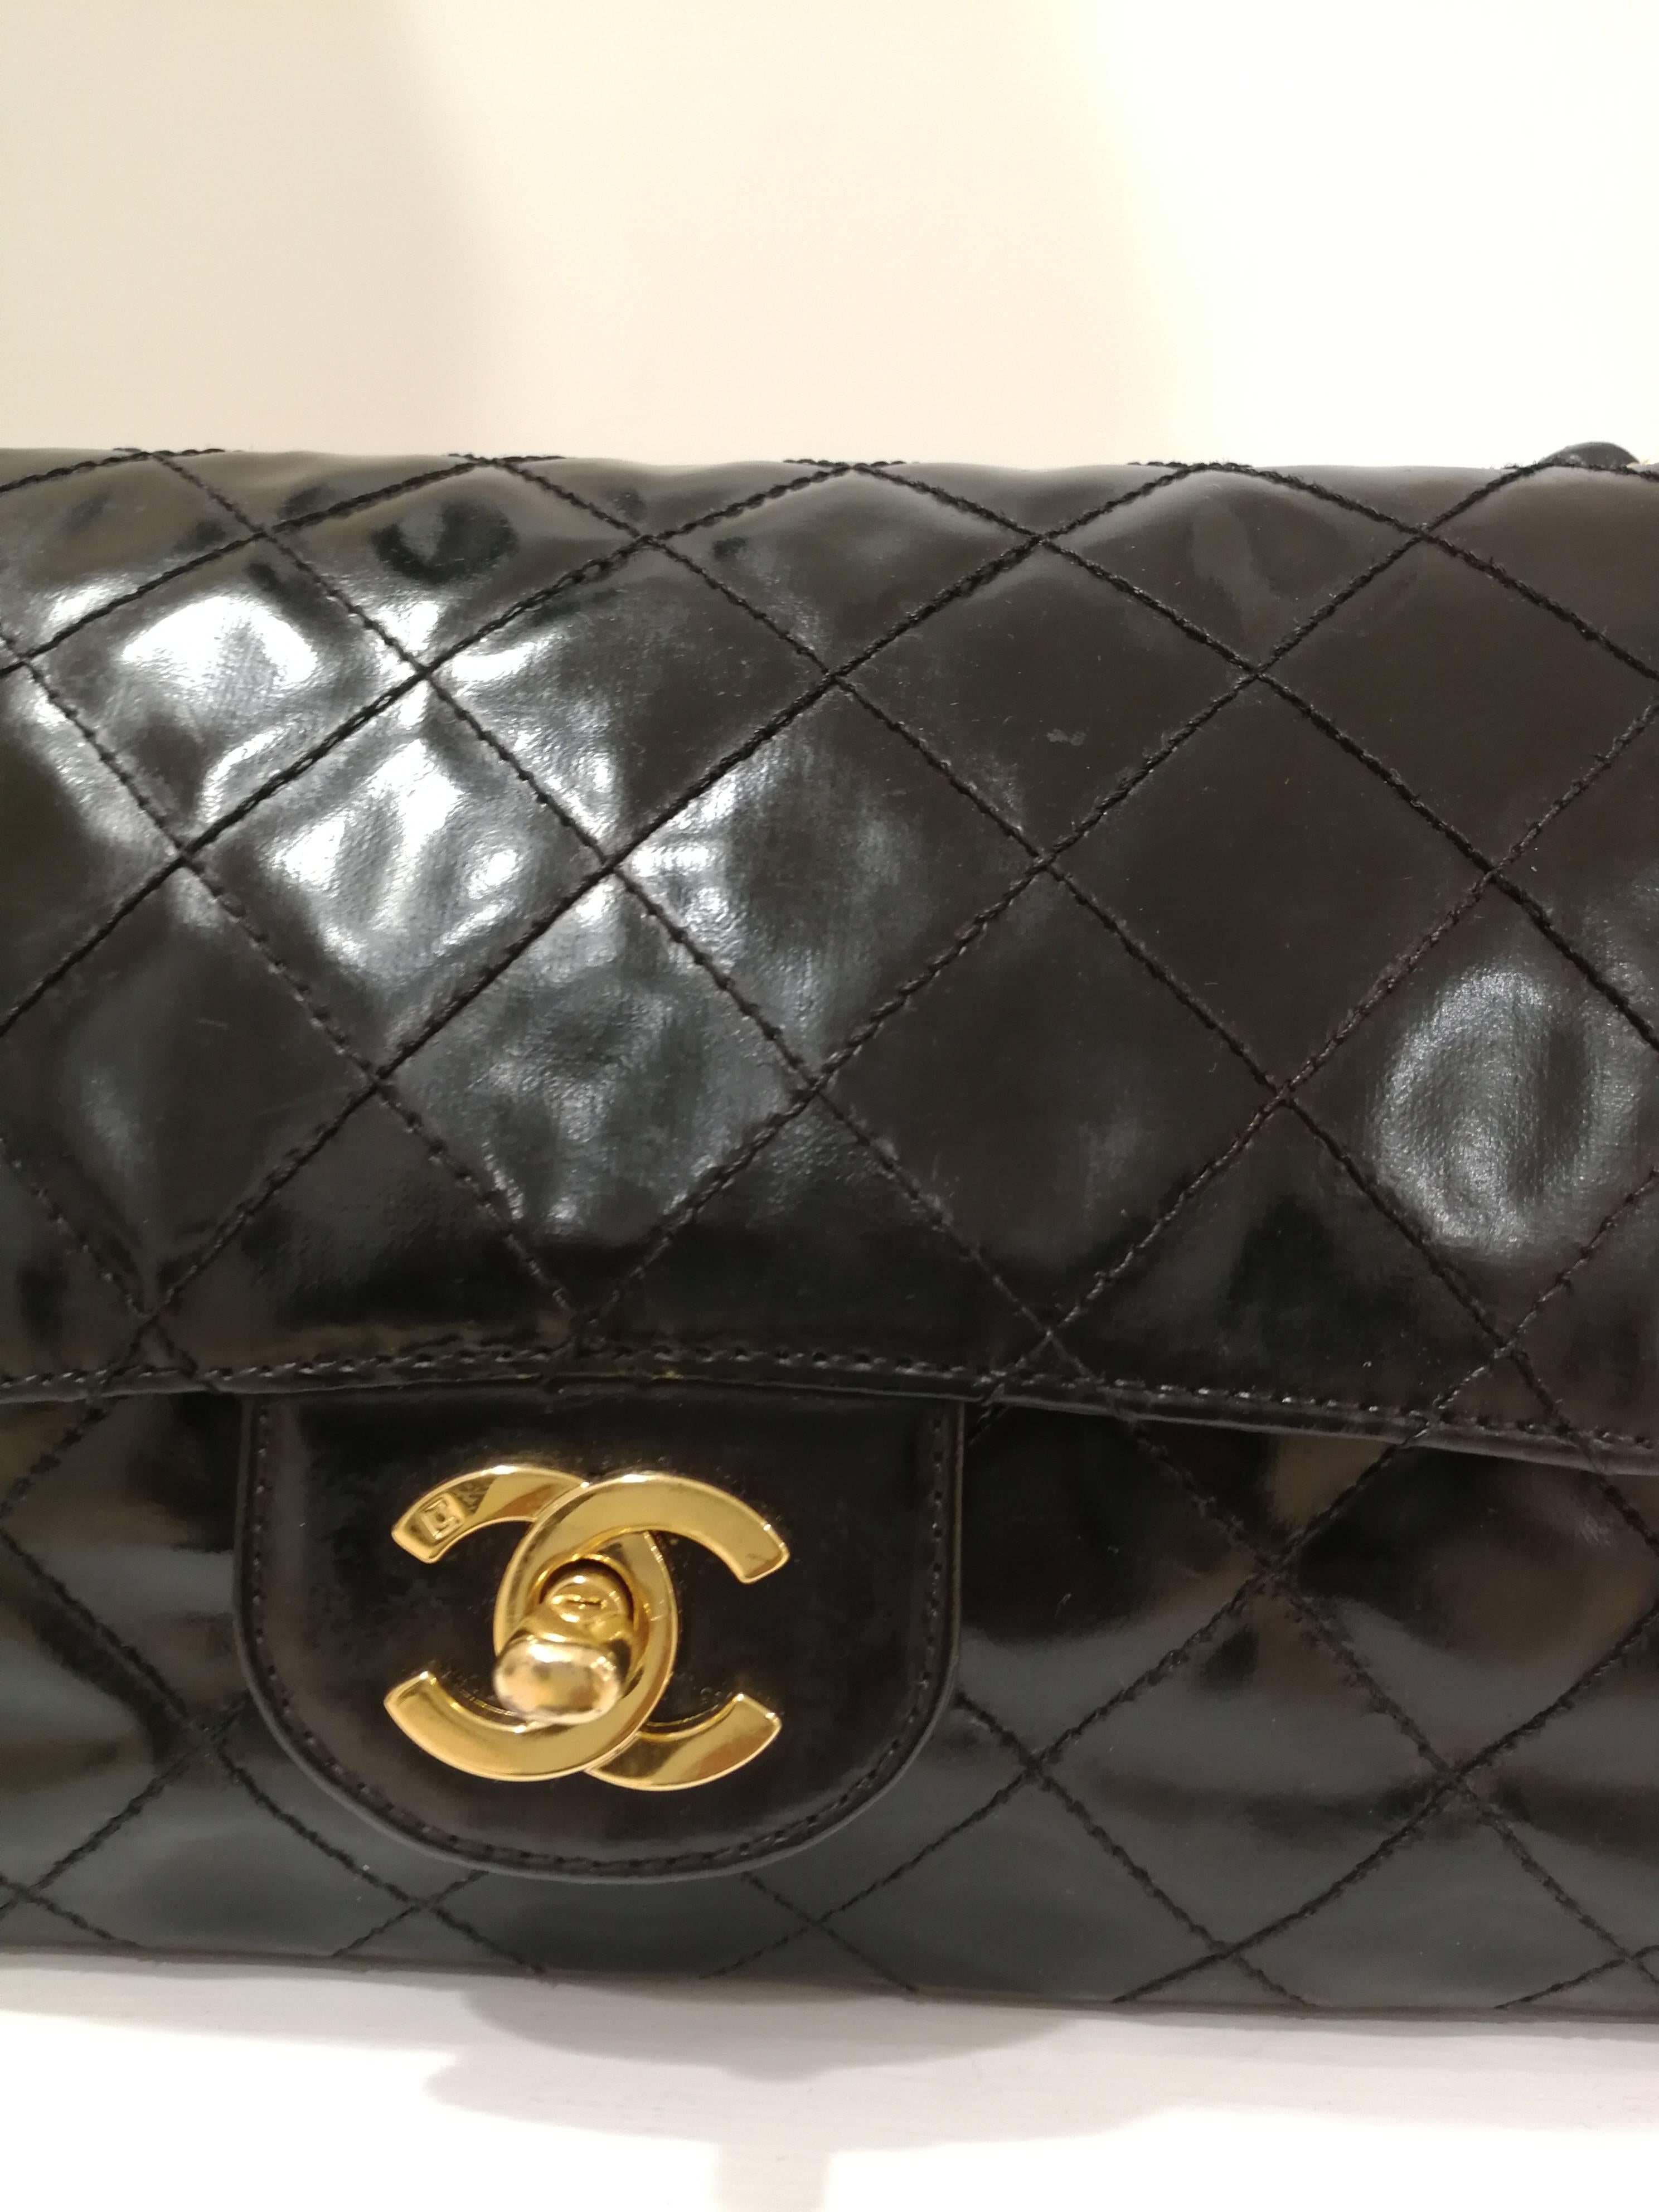 Women's 1997 Limited Edition Chanel Black 2.55 Gold tone Hardware Bag